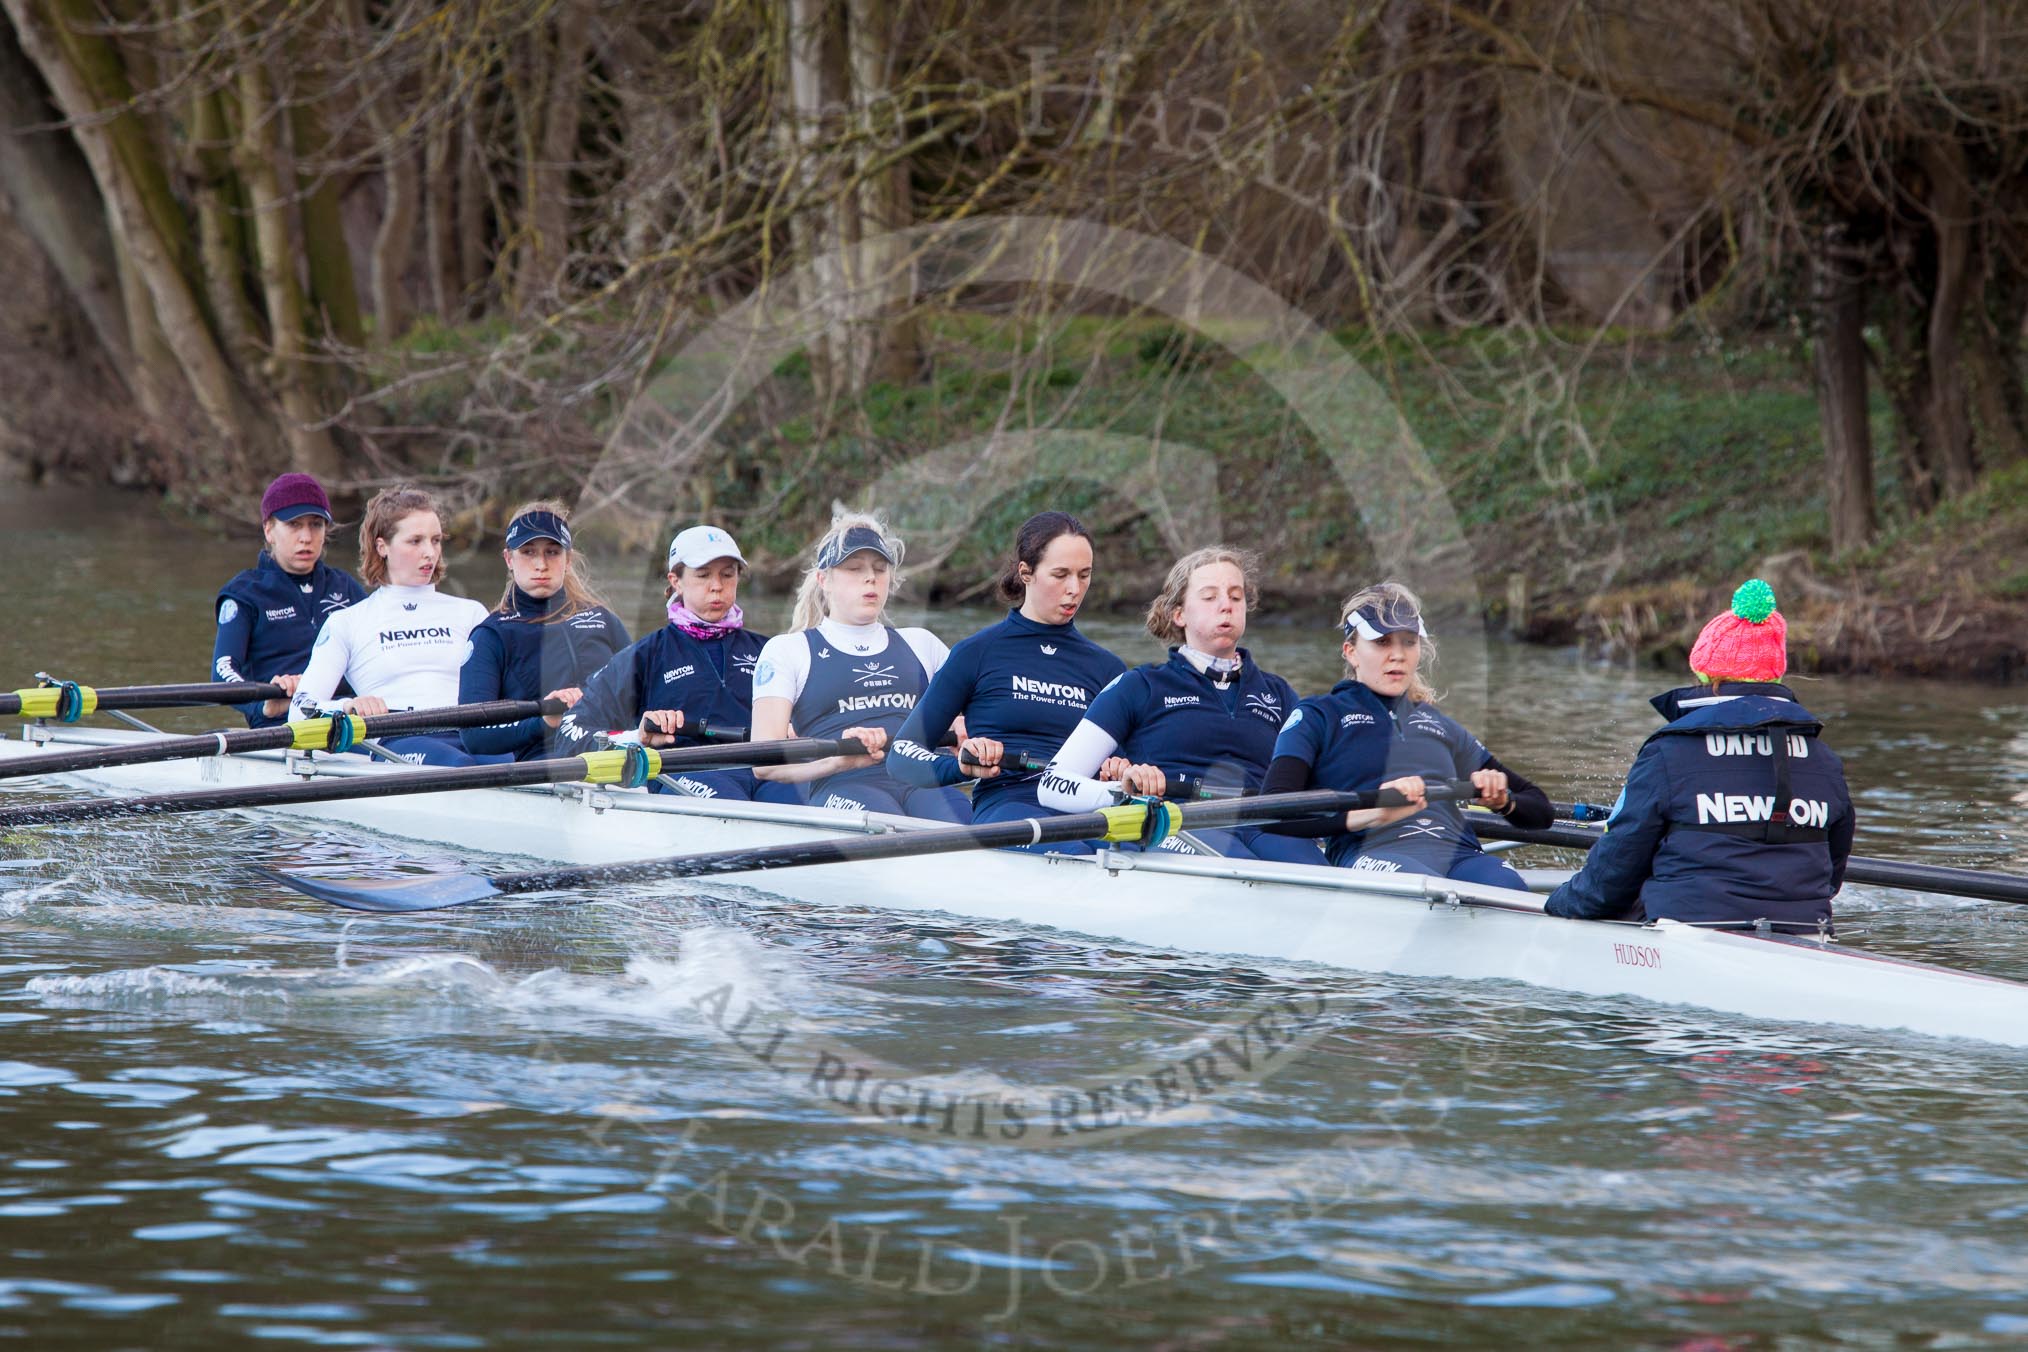 The Boat Race season 2013 - OUWBC training: The OUWBC Blue Boat during the training session - bow Mariann Novak, Alice Carrington-Windo, Mary Foord-Weston, Jo Lee, Amy Varney, Harriet Keane, Anastasia Chitty, stroke Maxie Scheske, and cox Katie Apfelbaum..
River Thames,
Wallingford,
Oxfordshire,
United Kingdom,
on 13 March 2013 at 17:12, image #101